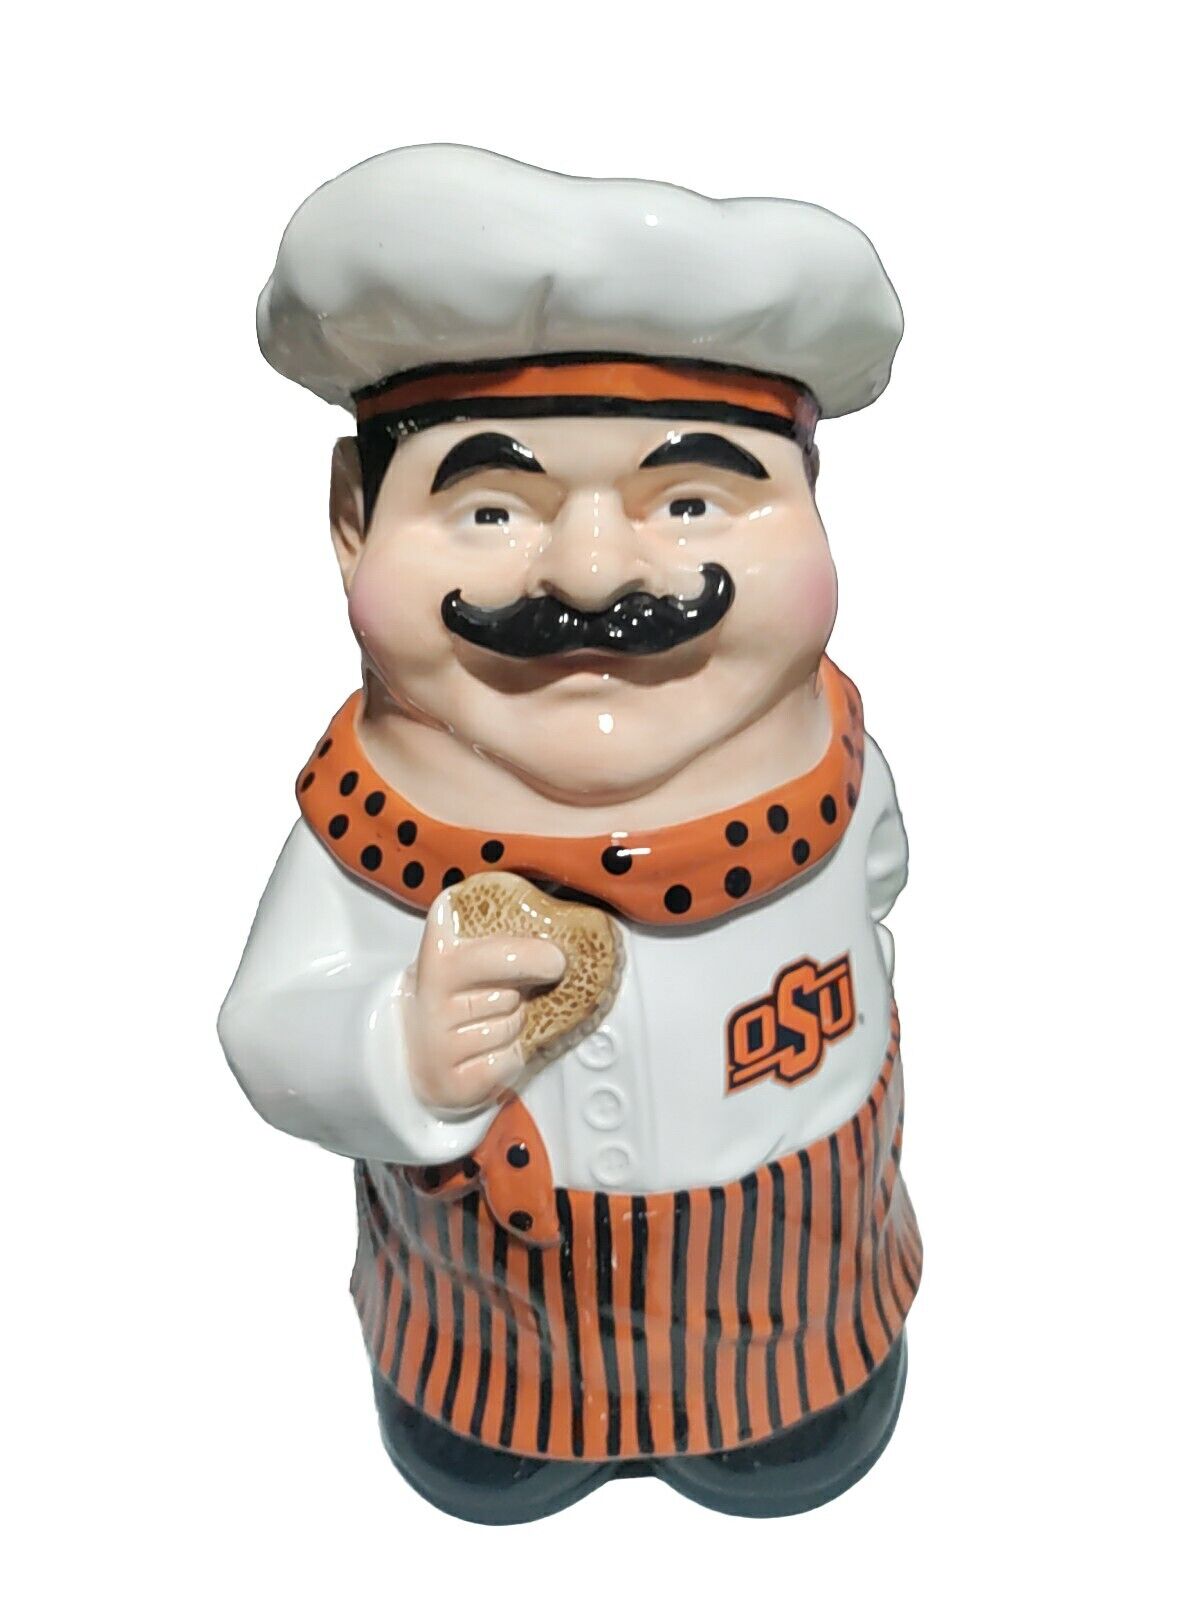 Oklahoma State University Chef Cookie Jar-Rare Great Condition 1st In A Series